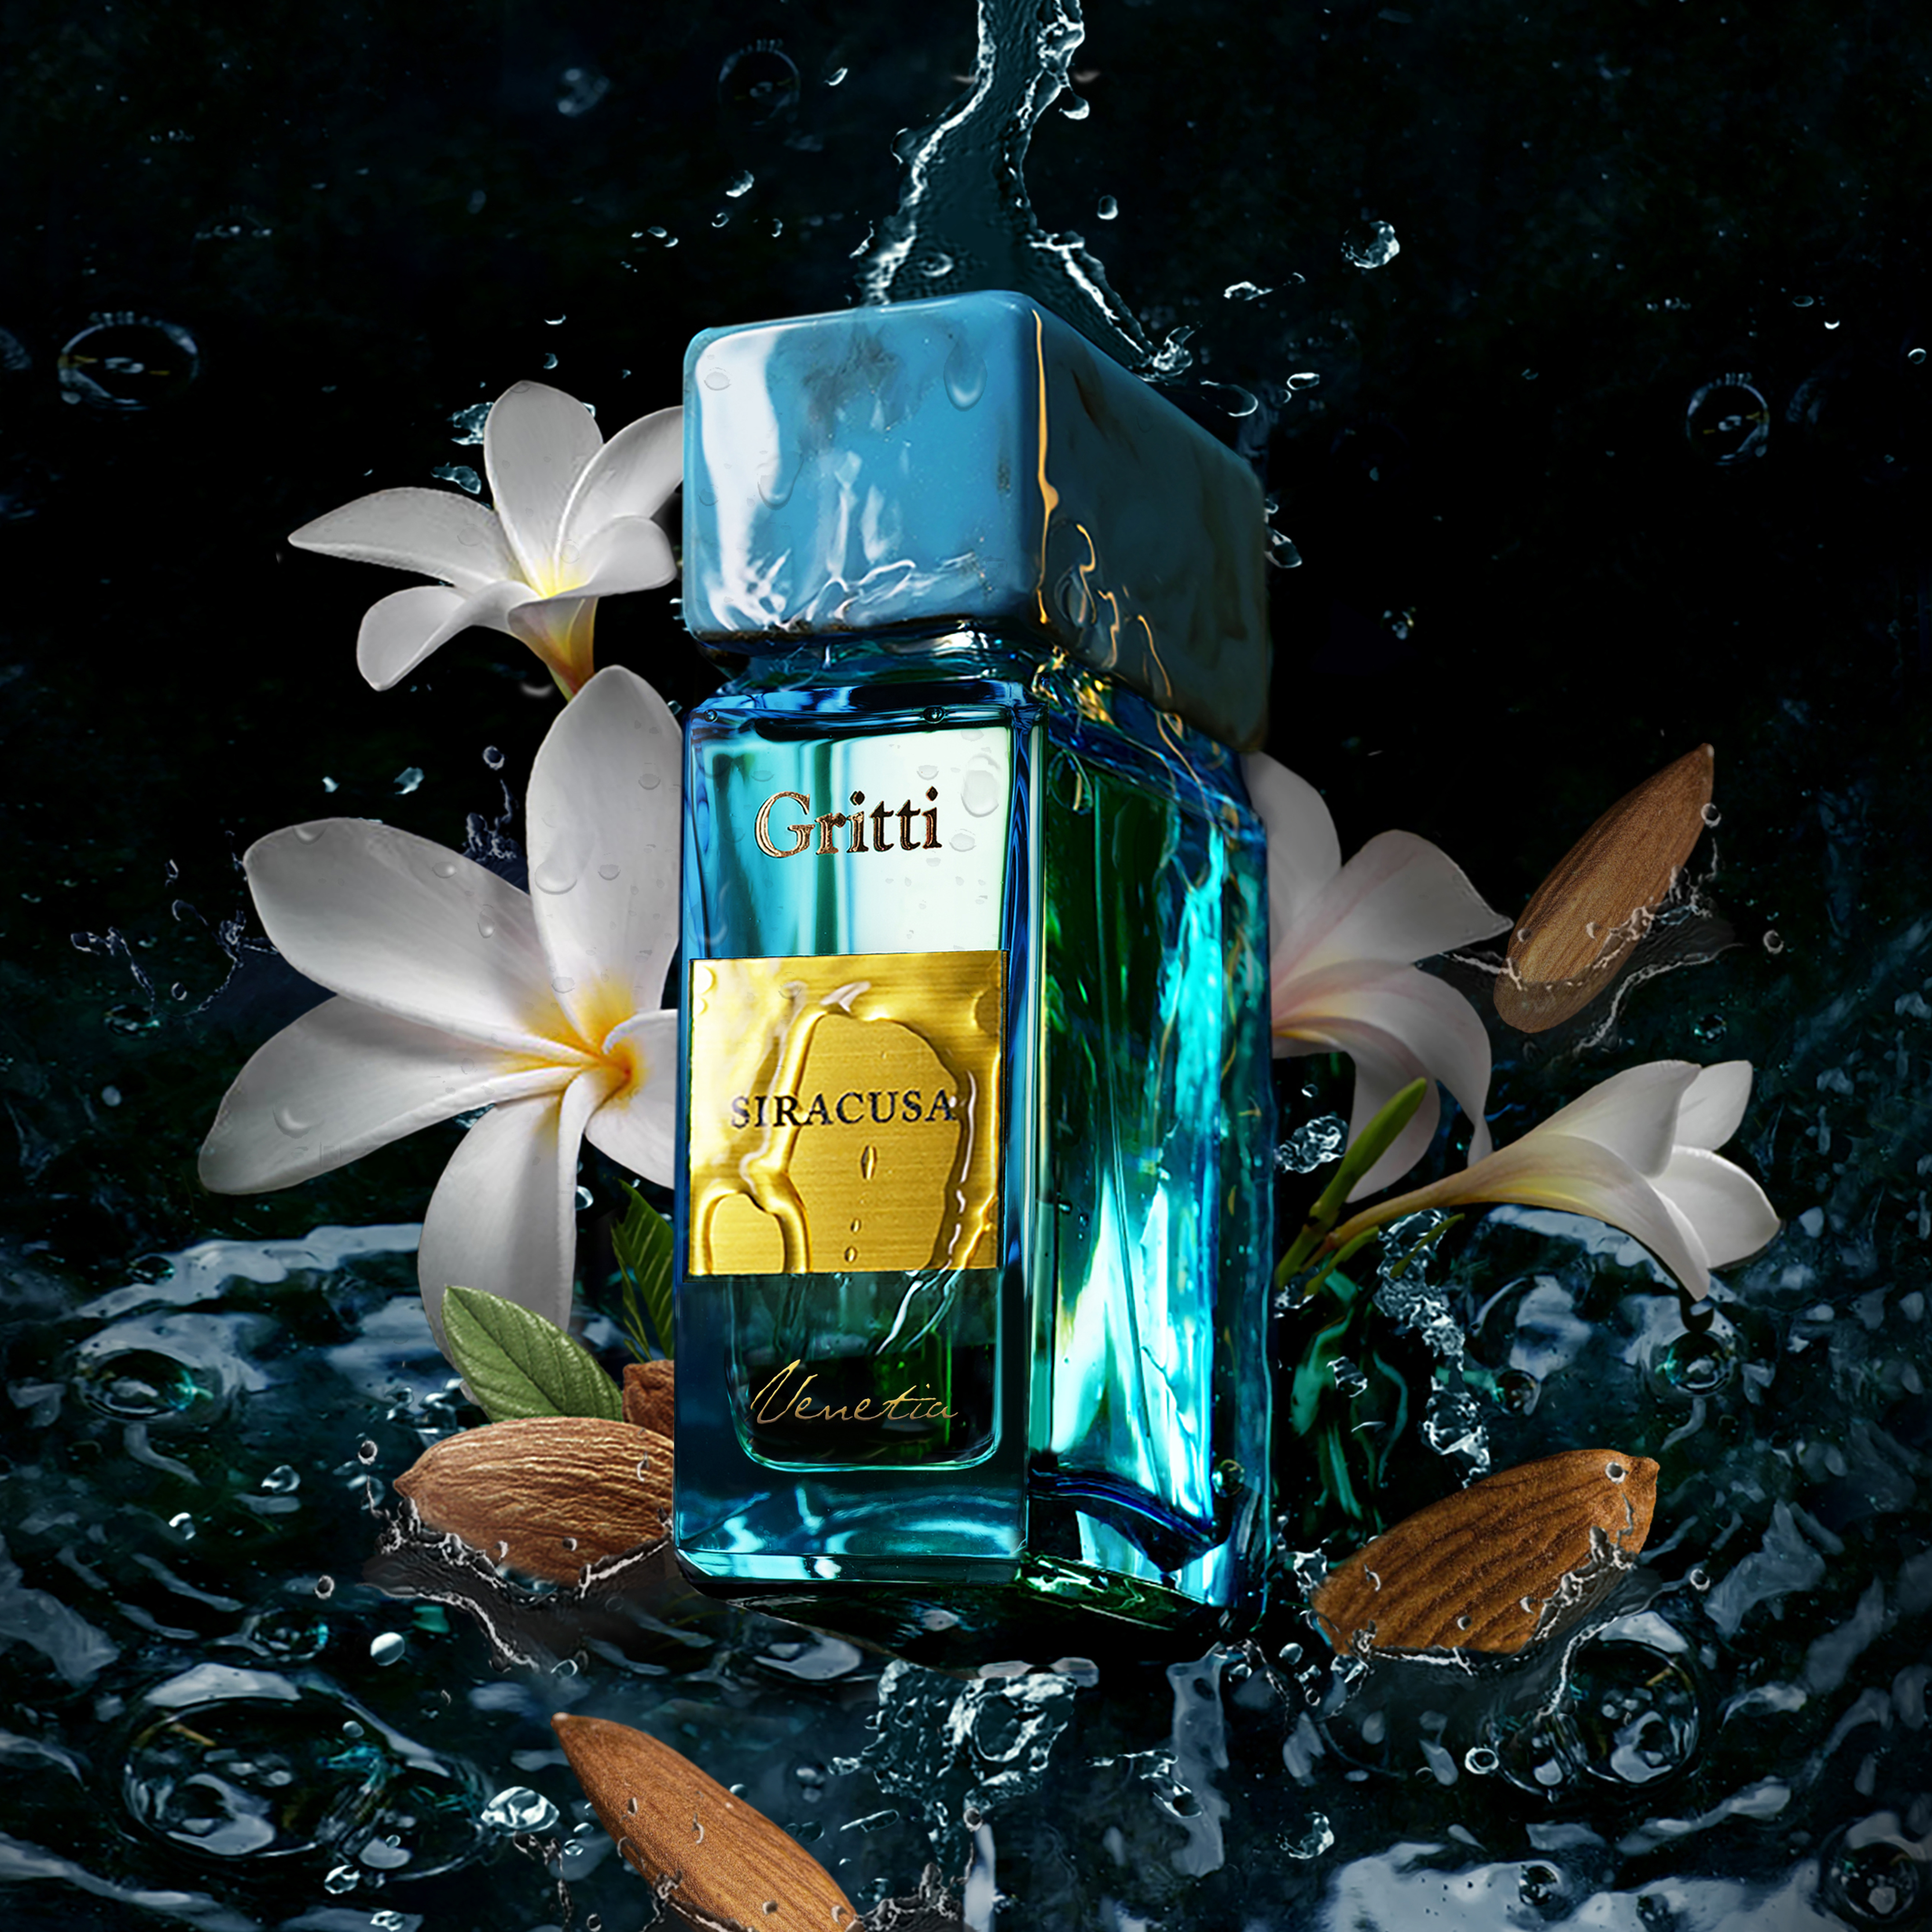 Dancing Blossom - Perfumes - Exceptional Creations